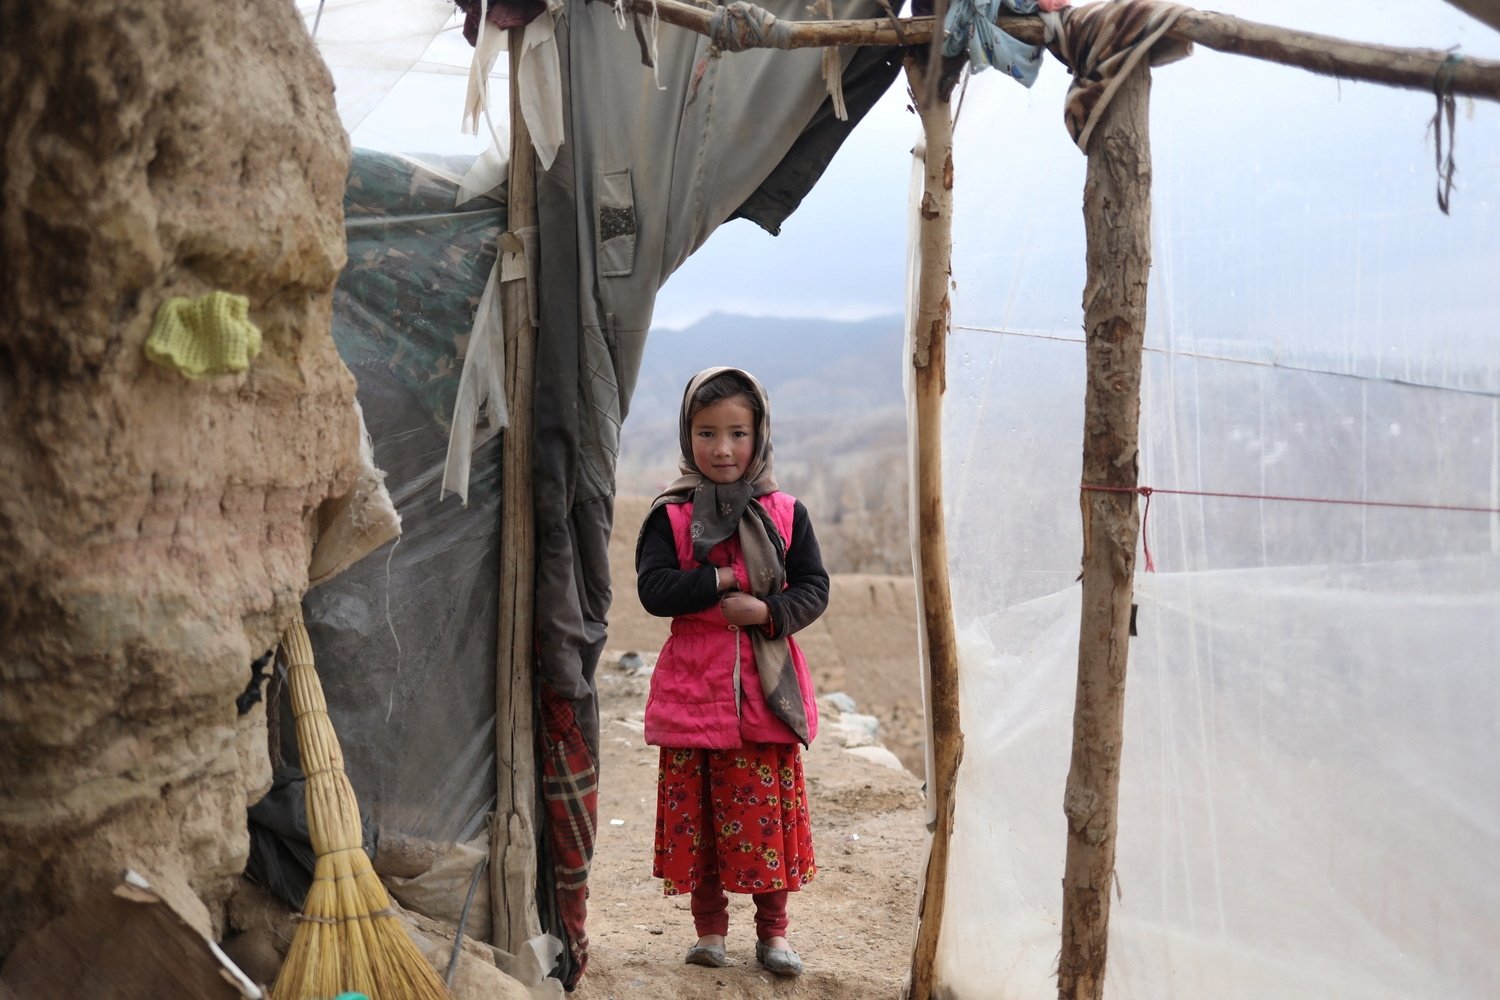 Mojgan, 9, poses for a photograph in the doorway of a house in Bamiyan, Afghanistan, Dec. 22, 2021. (Reuters Photo)